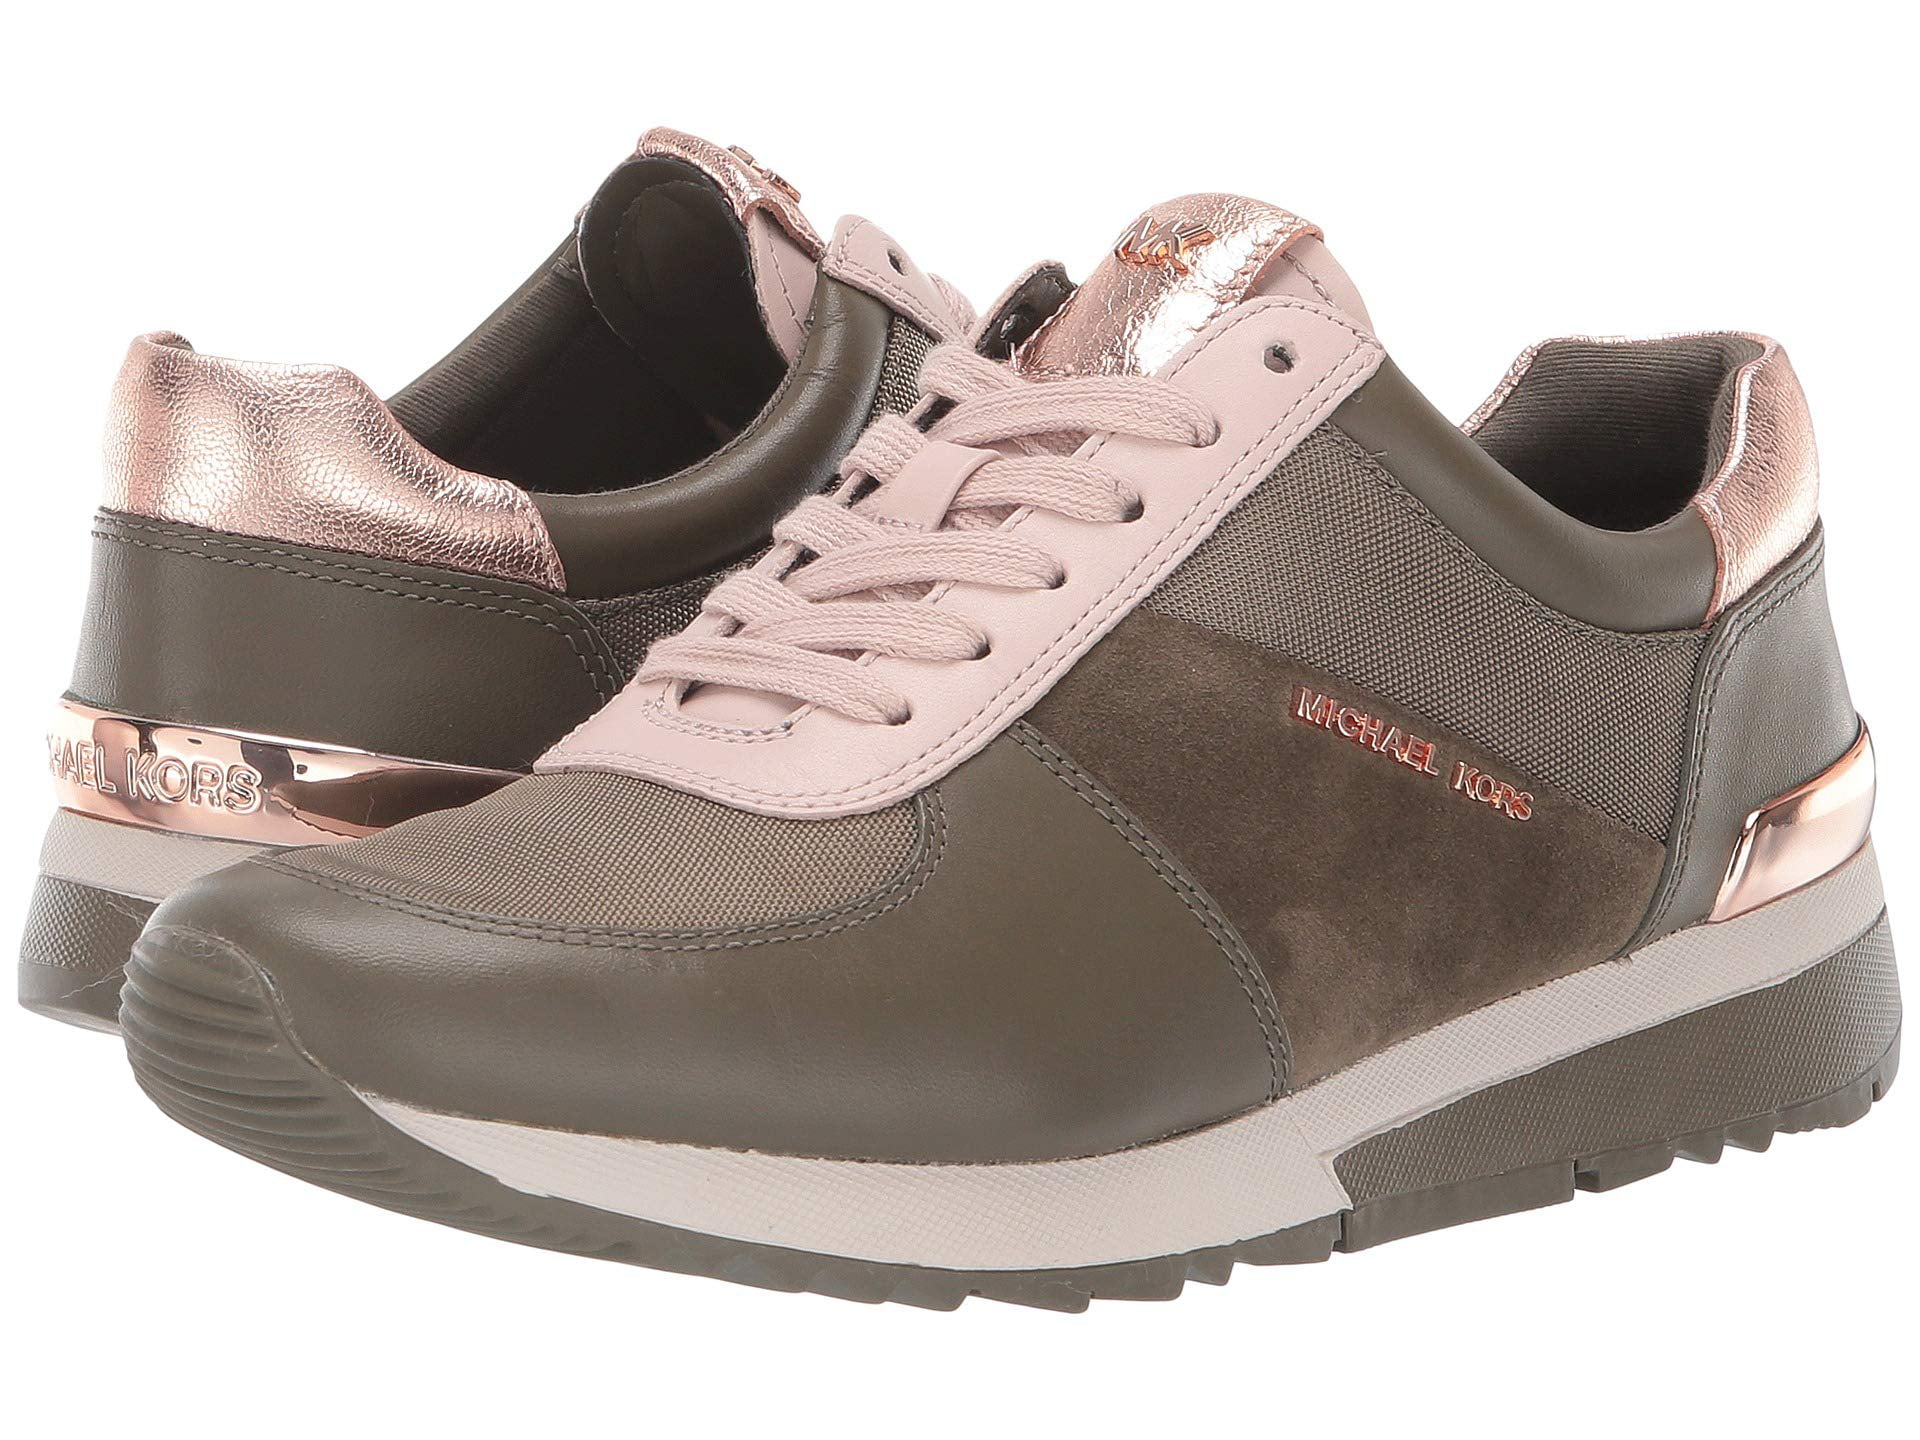 Michael Kors MK Women's Allie Trainer Leather Canvas Sneakers Shoes Olive  () 